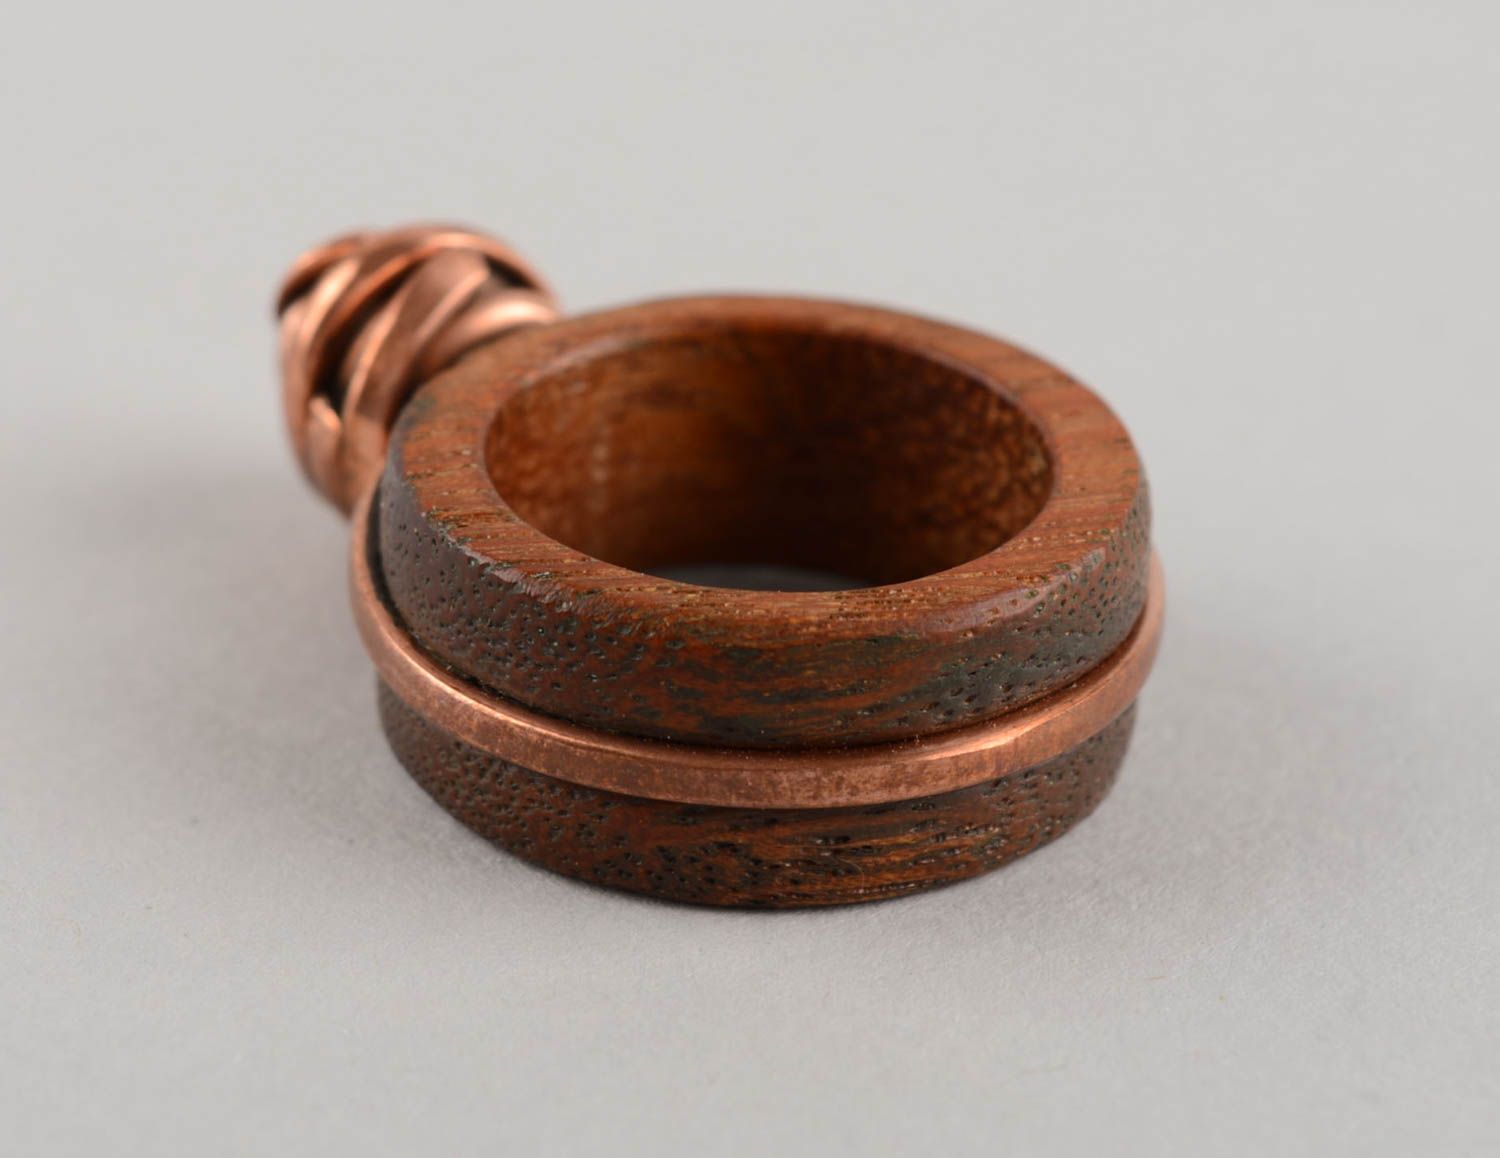 Extravagant cute jewelry handmade ring made of copper and wood for women photo 4